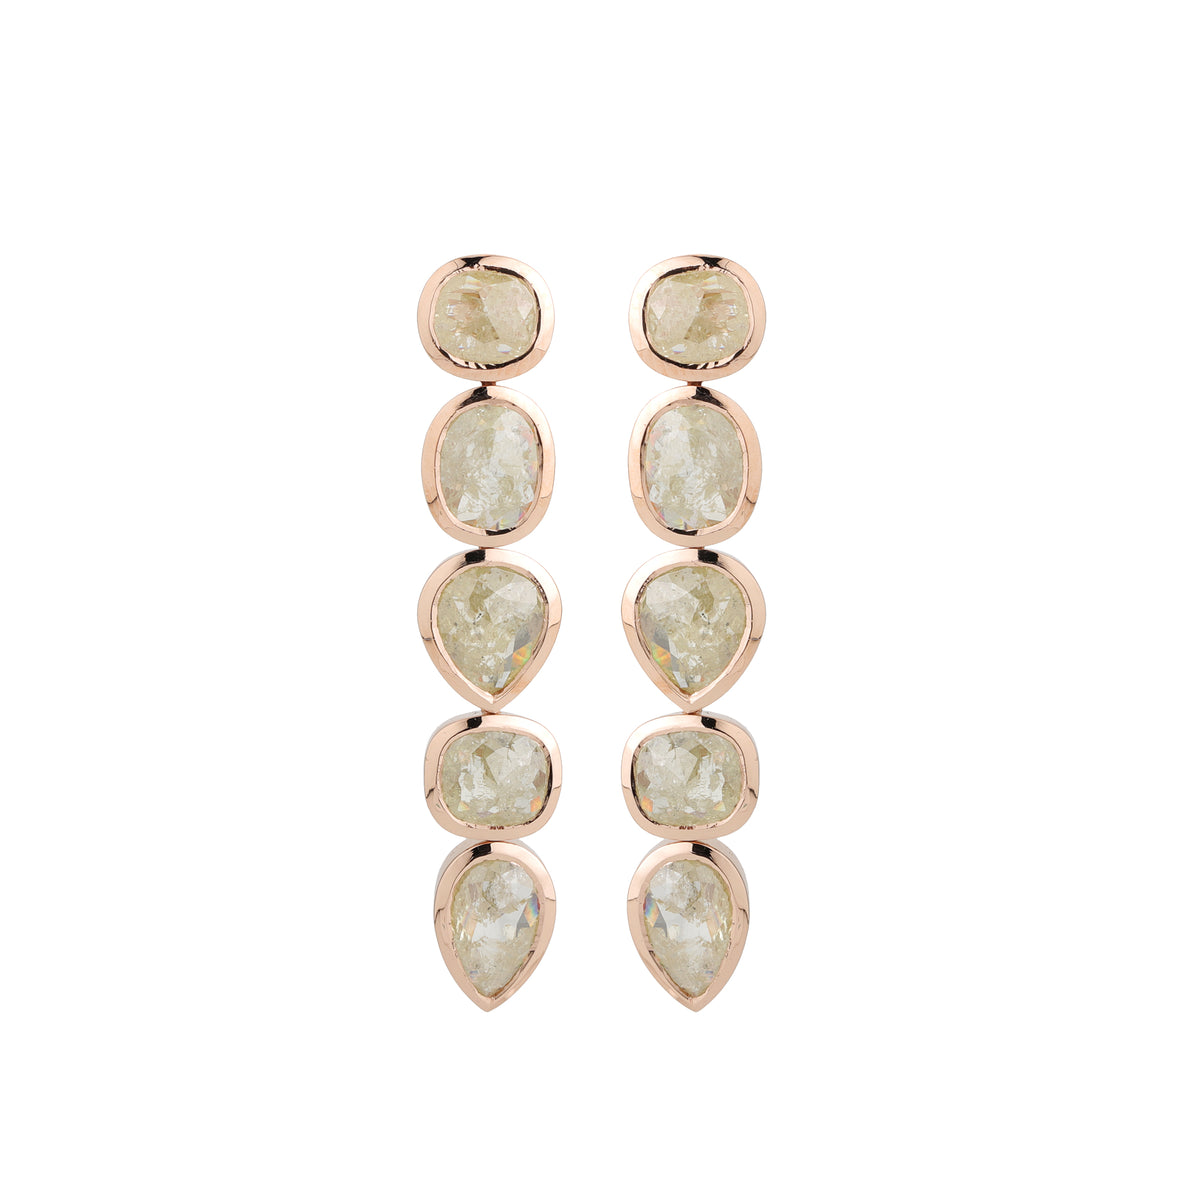 Earrings made of 750 gold with diamonds